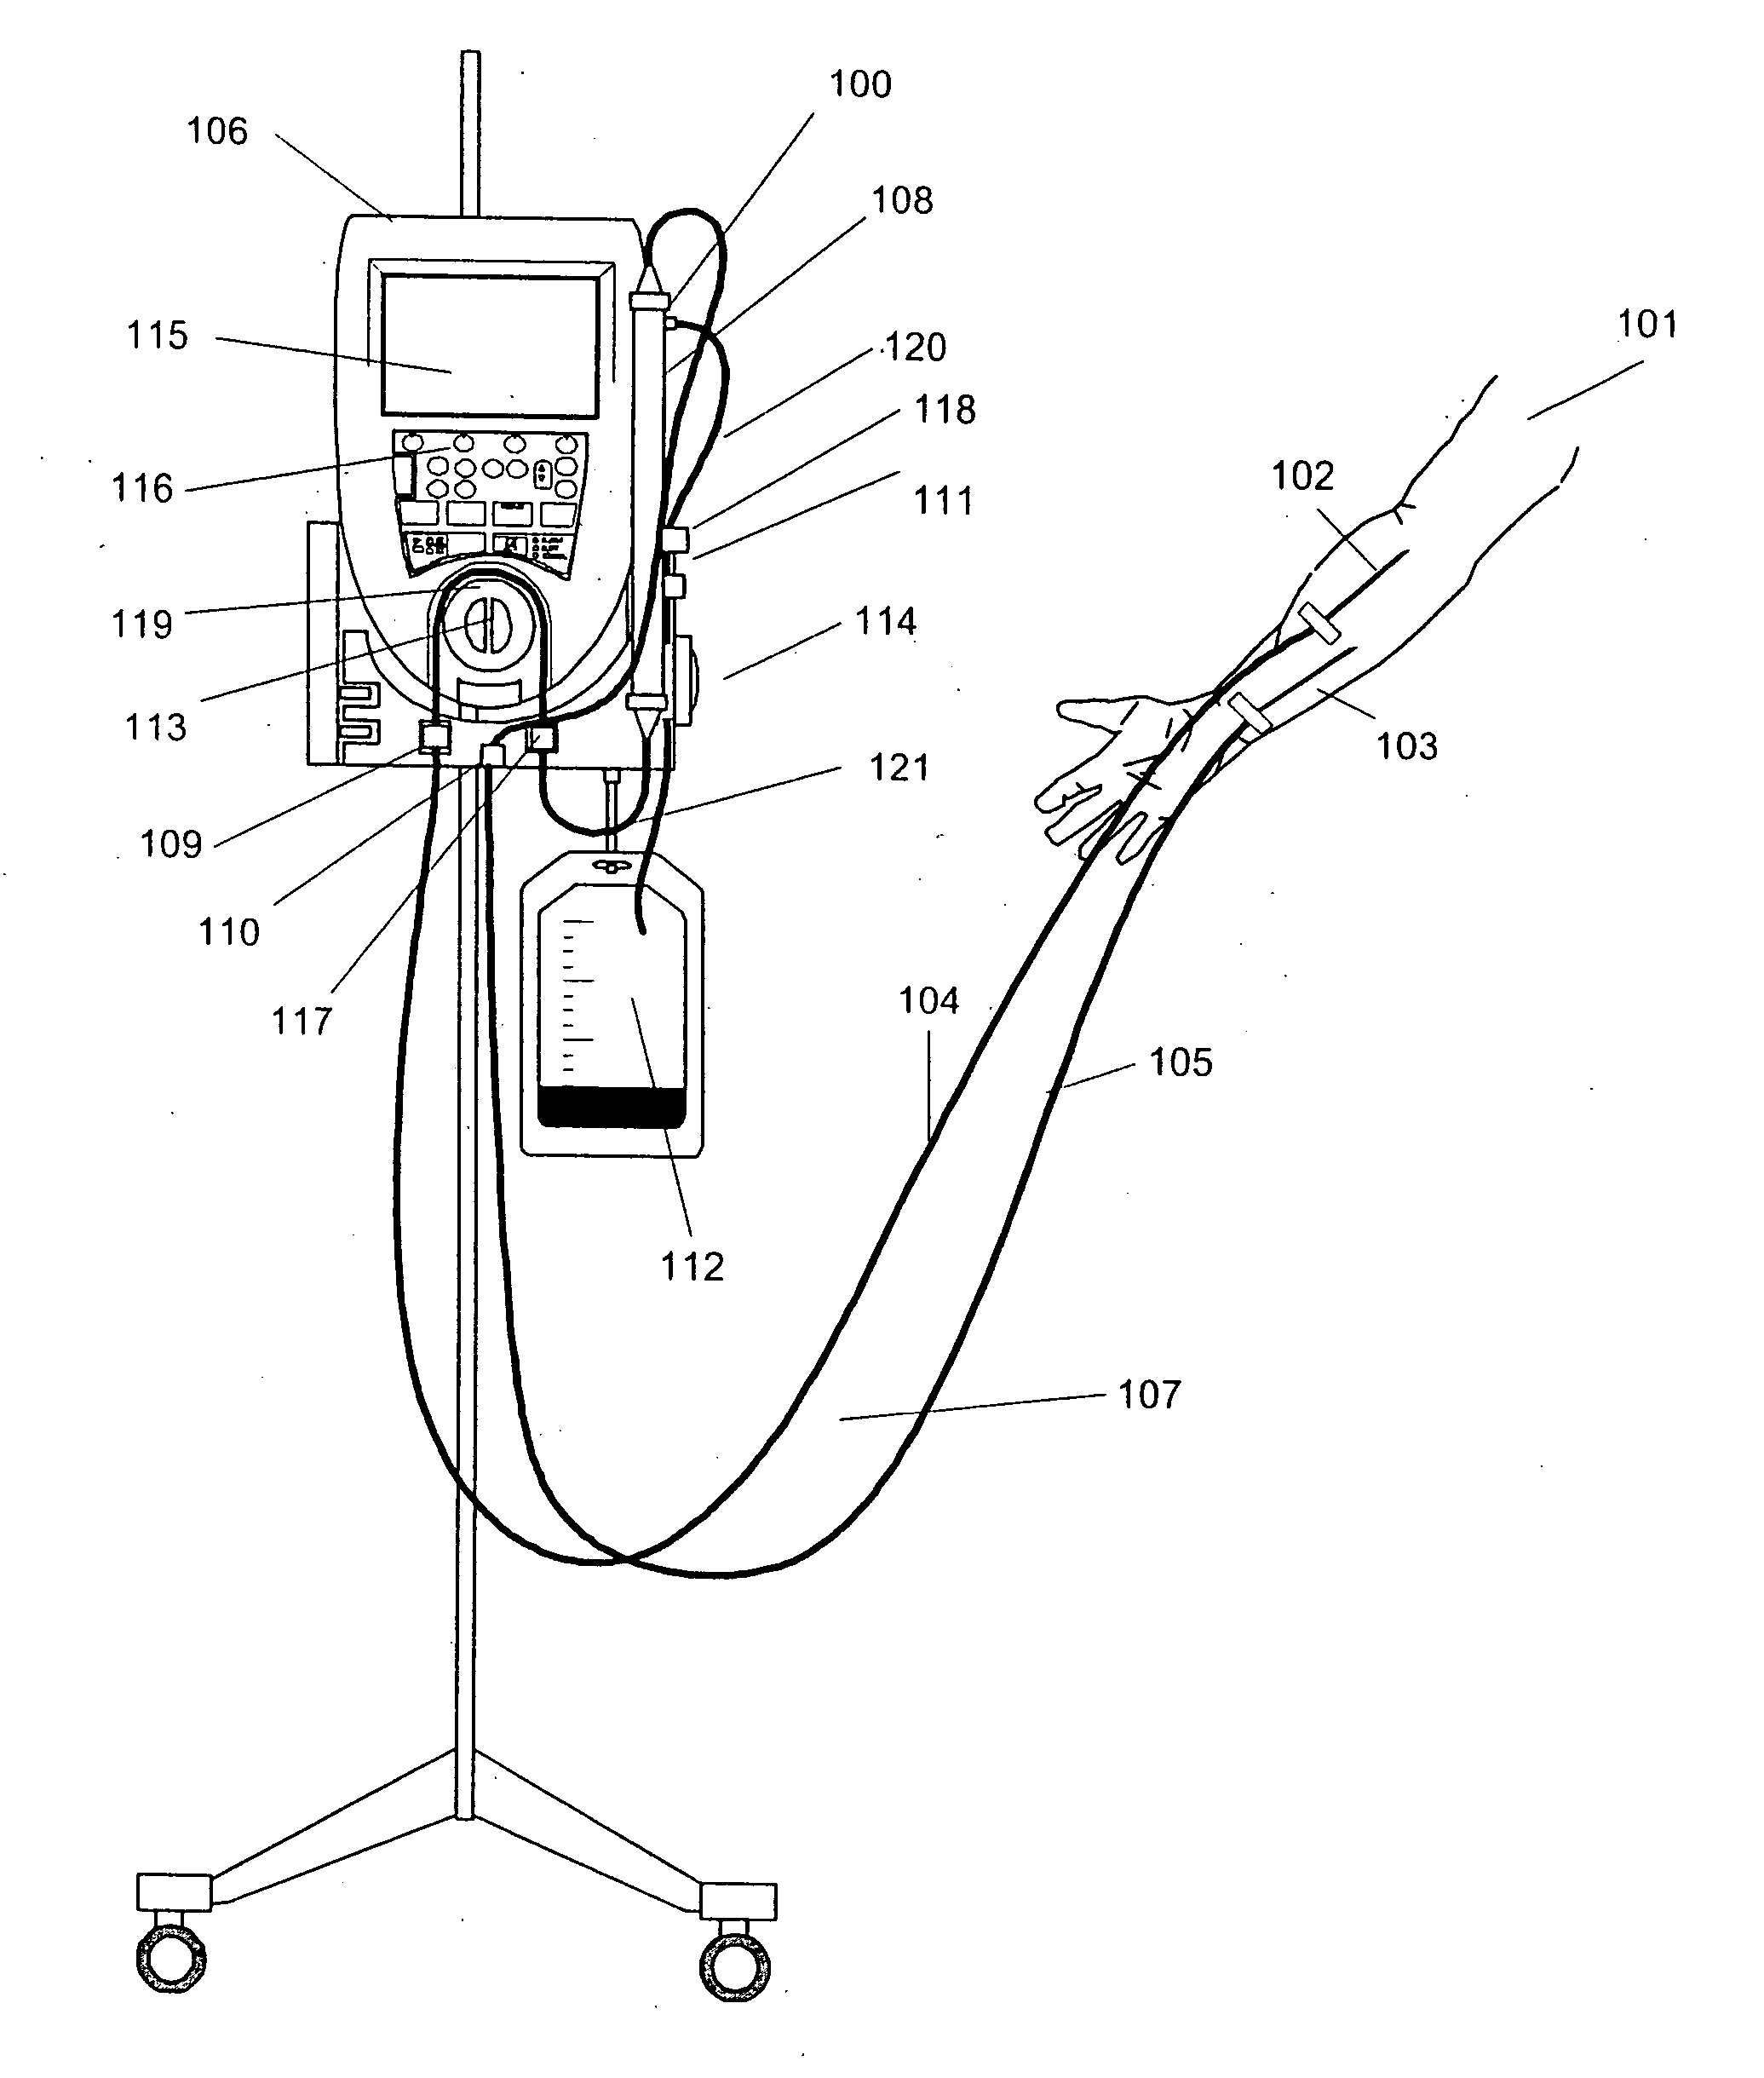 Method to control blood and filtrate flowing through an extracorporeal device